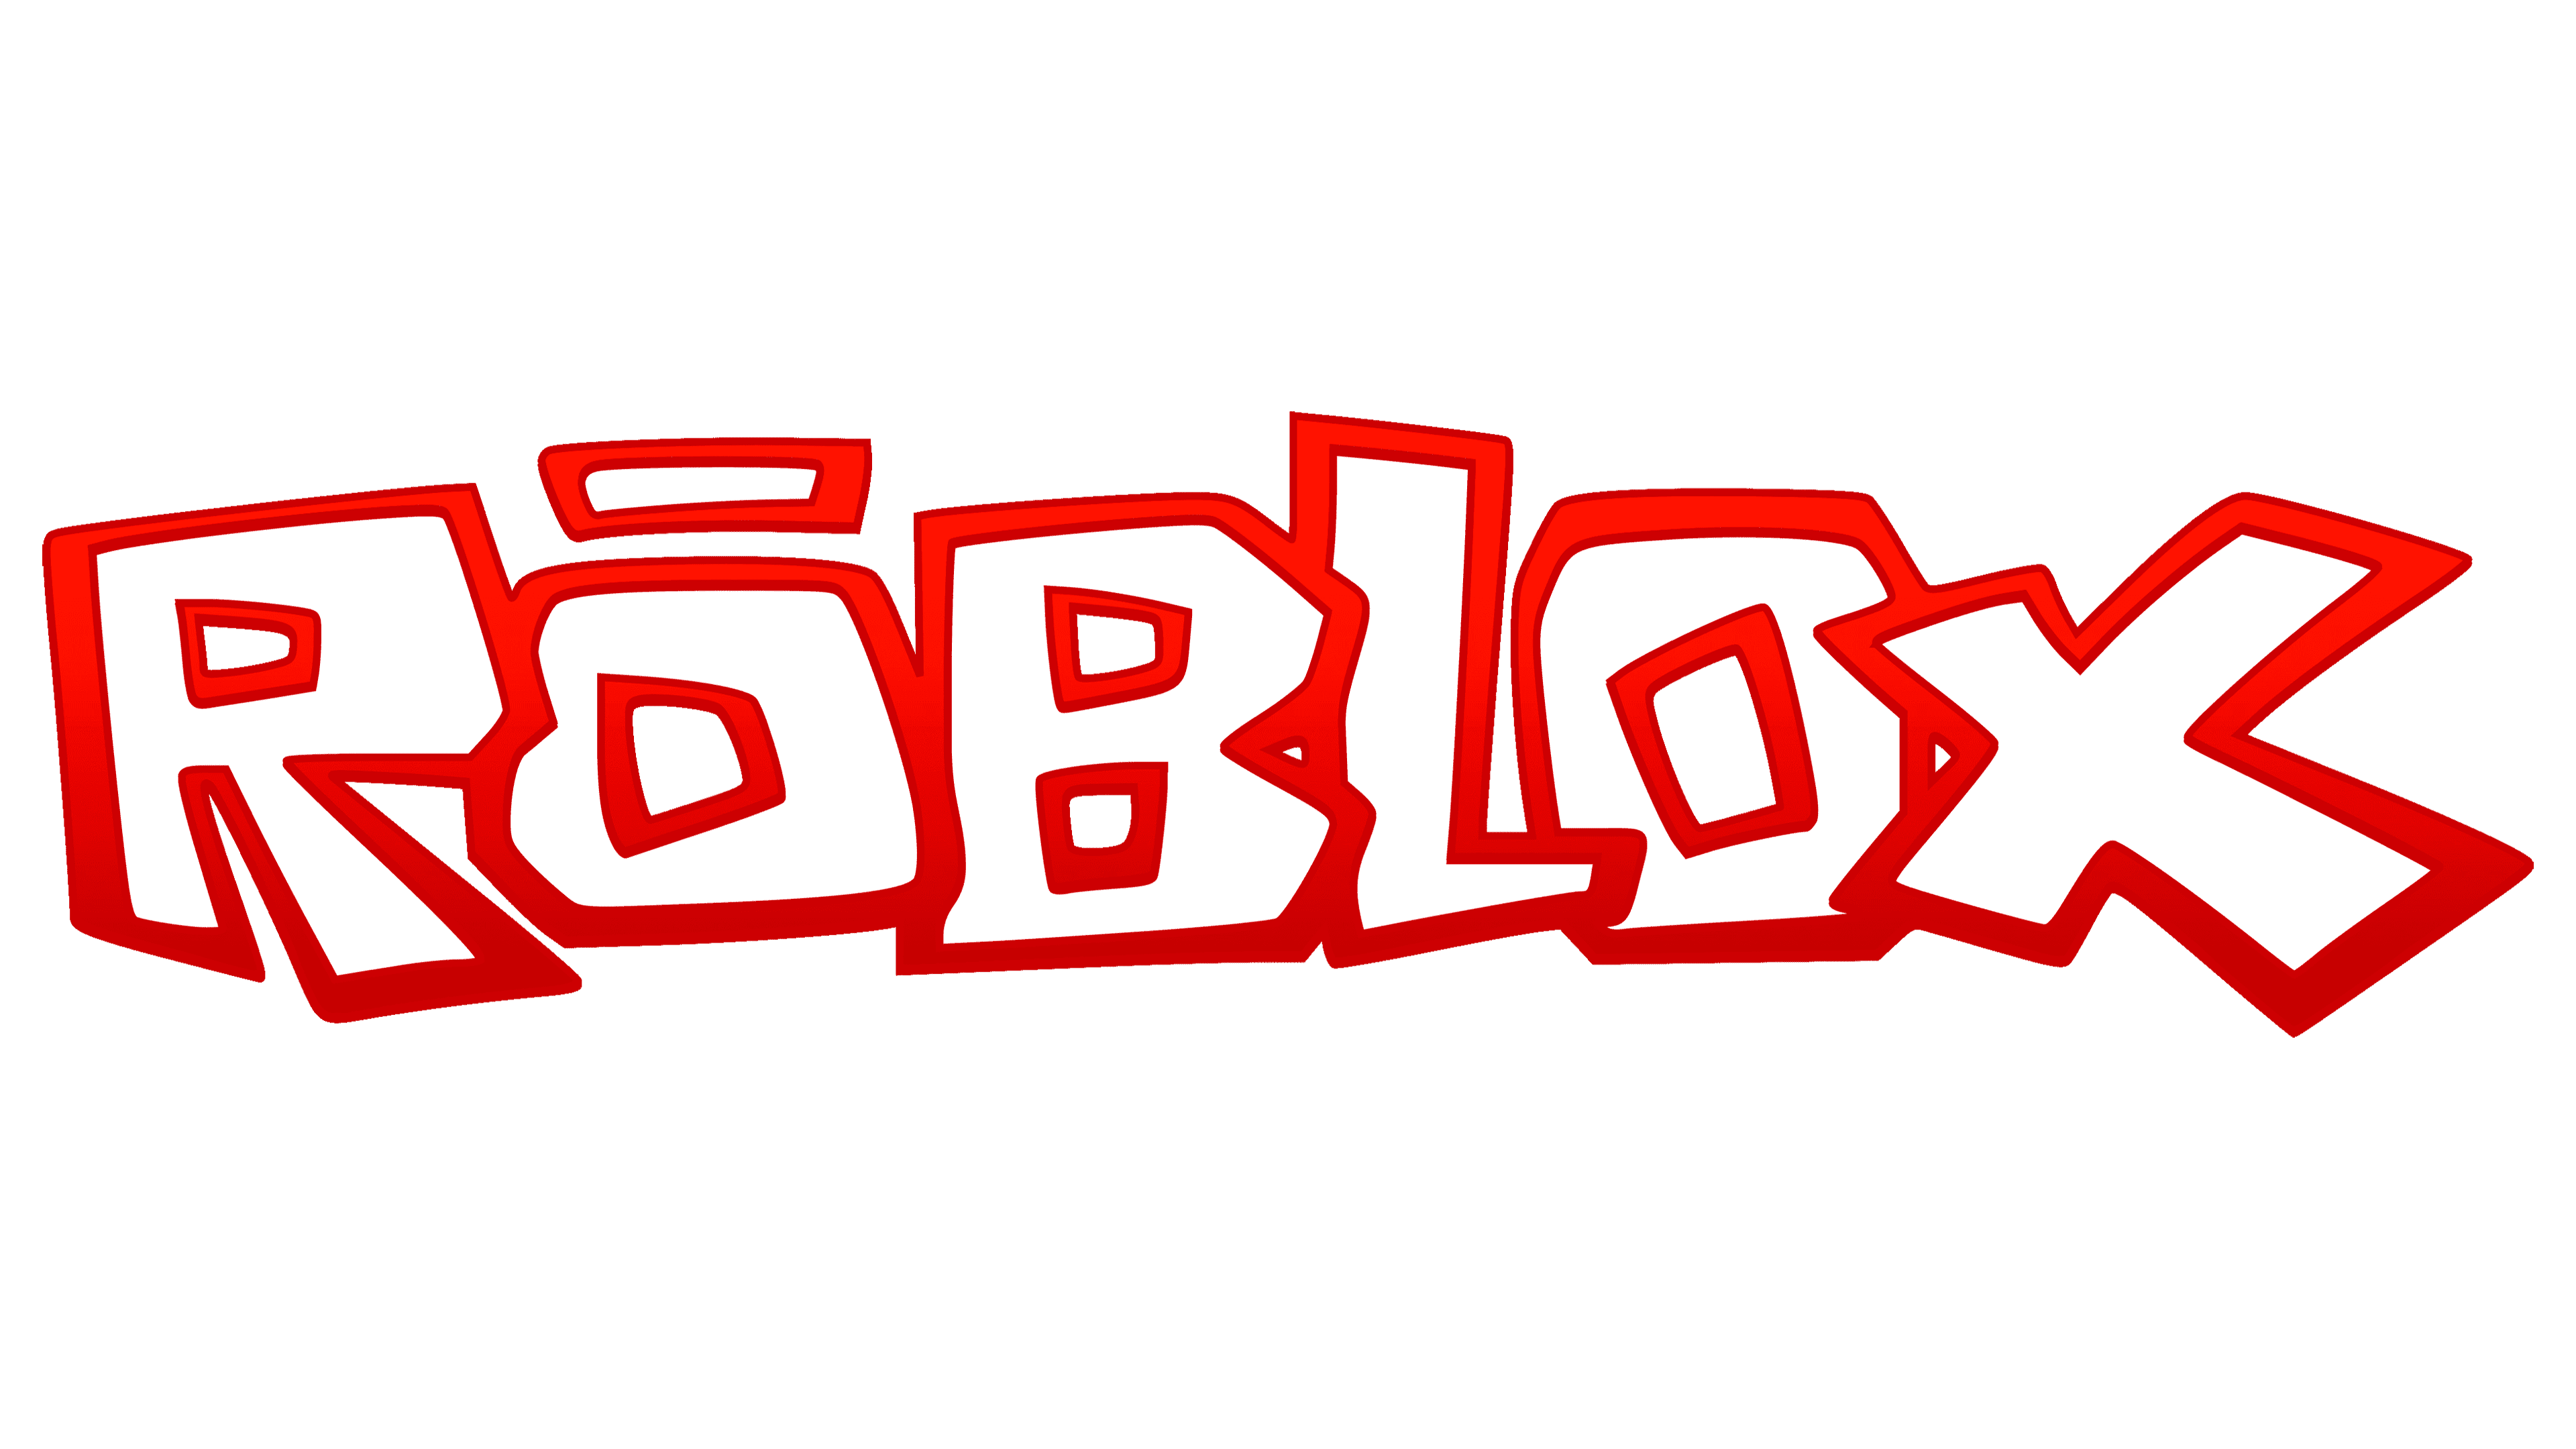 Roblox Logo Design — History, Meaning and Evolution